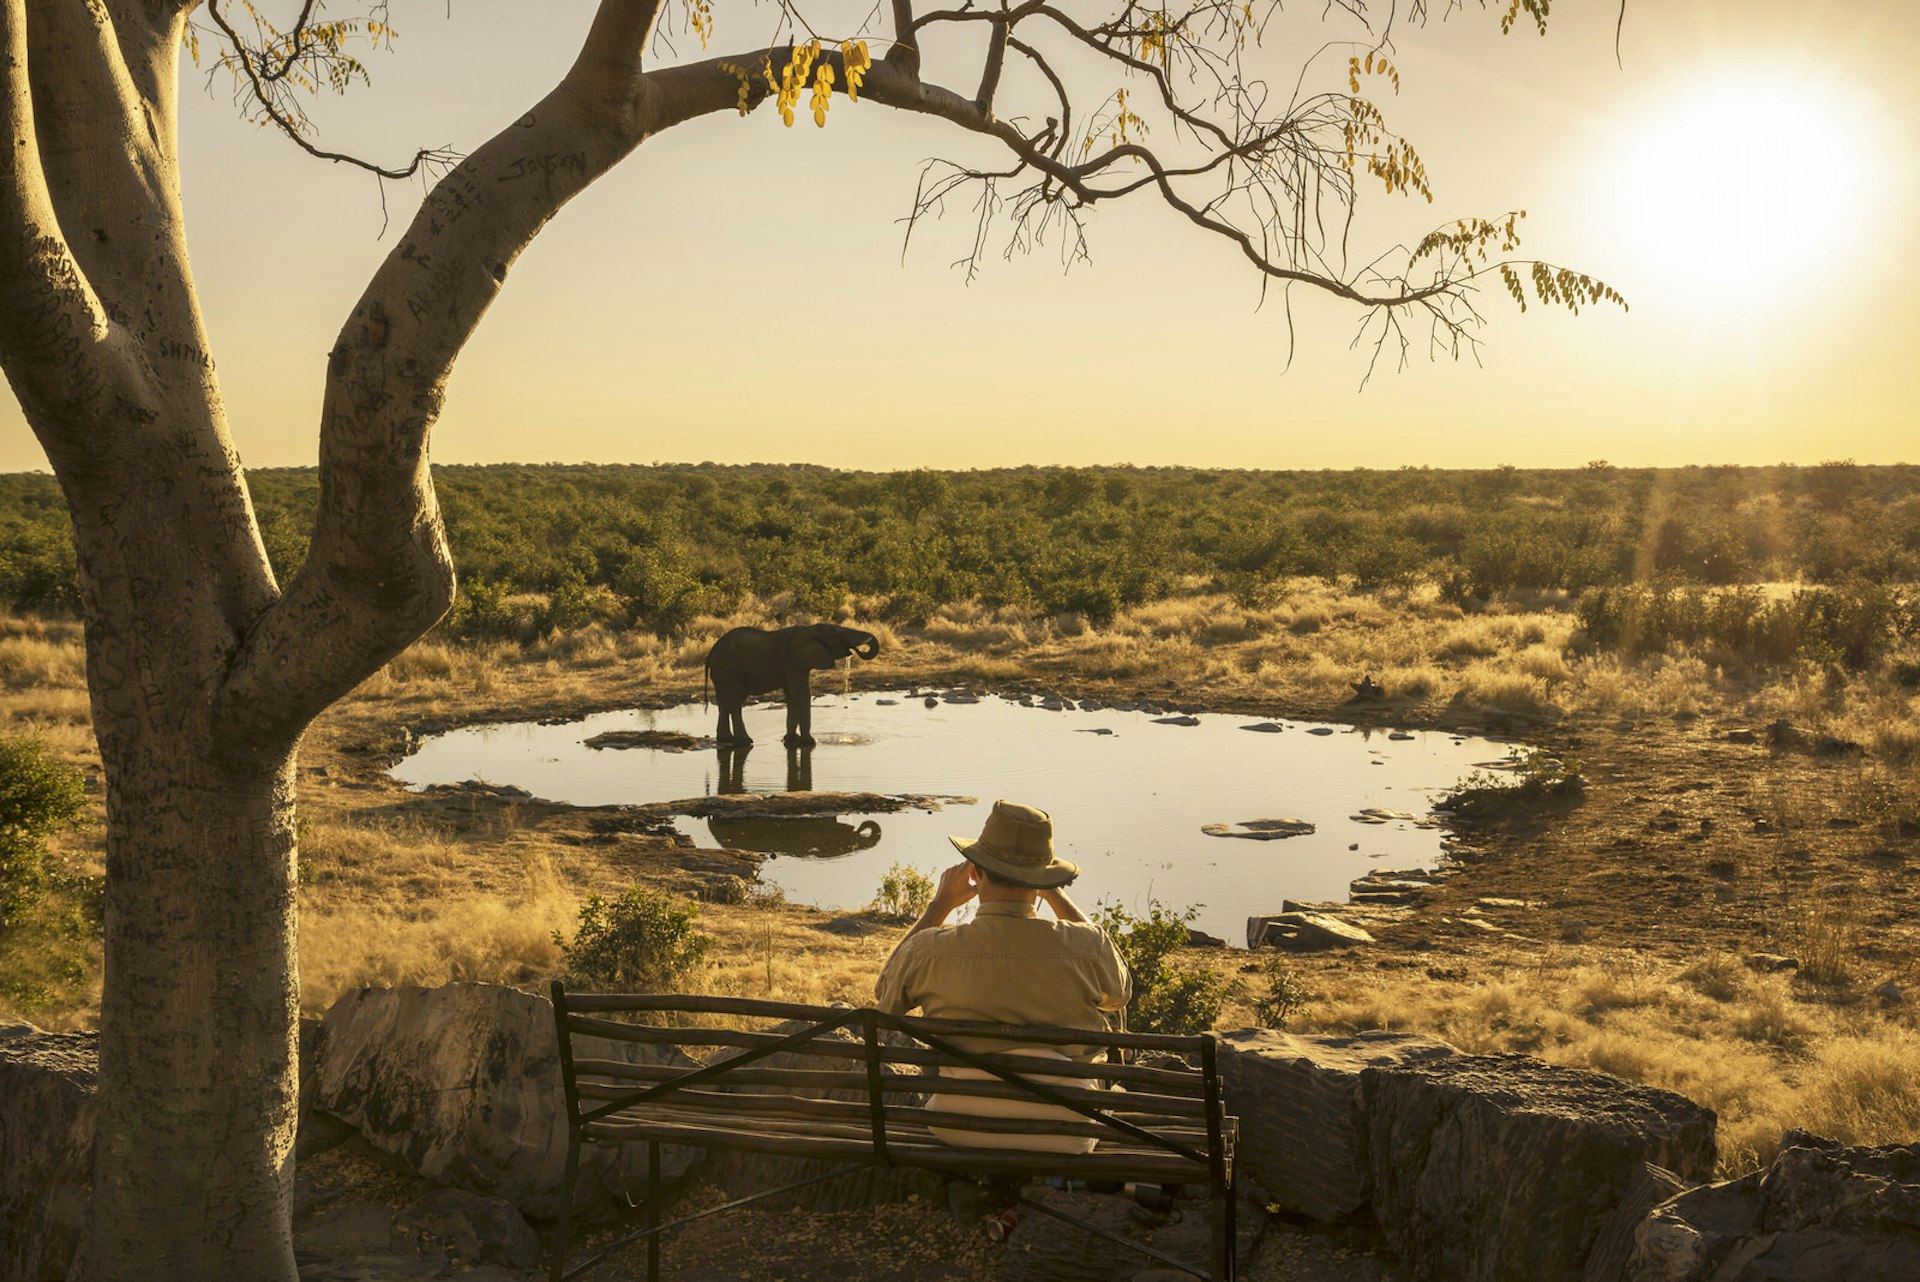 A man sitting on a wooden bench next to a tree watches an elephant drinking water from a large watering hole